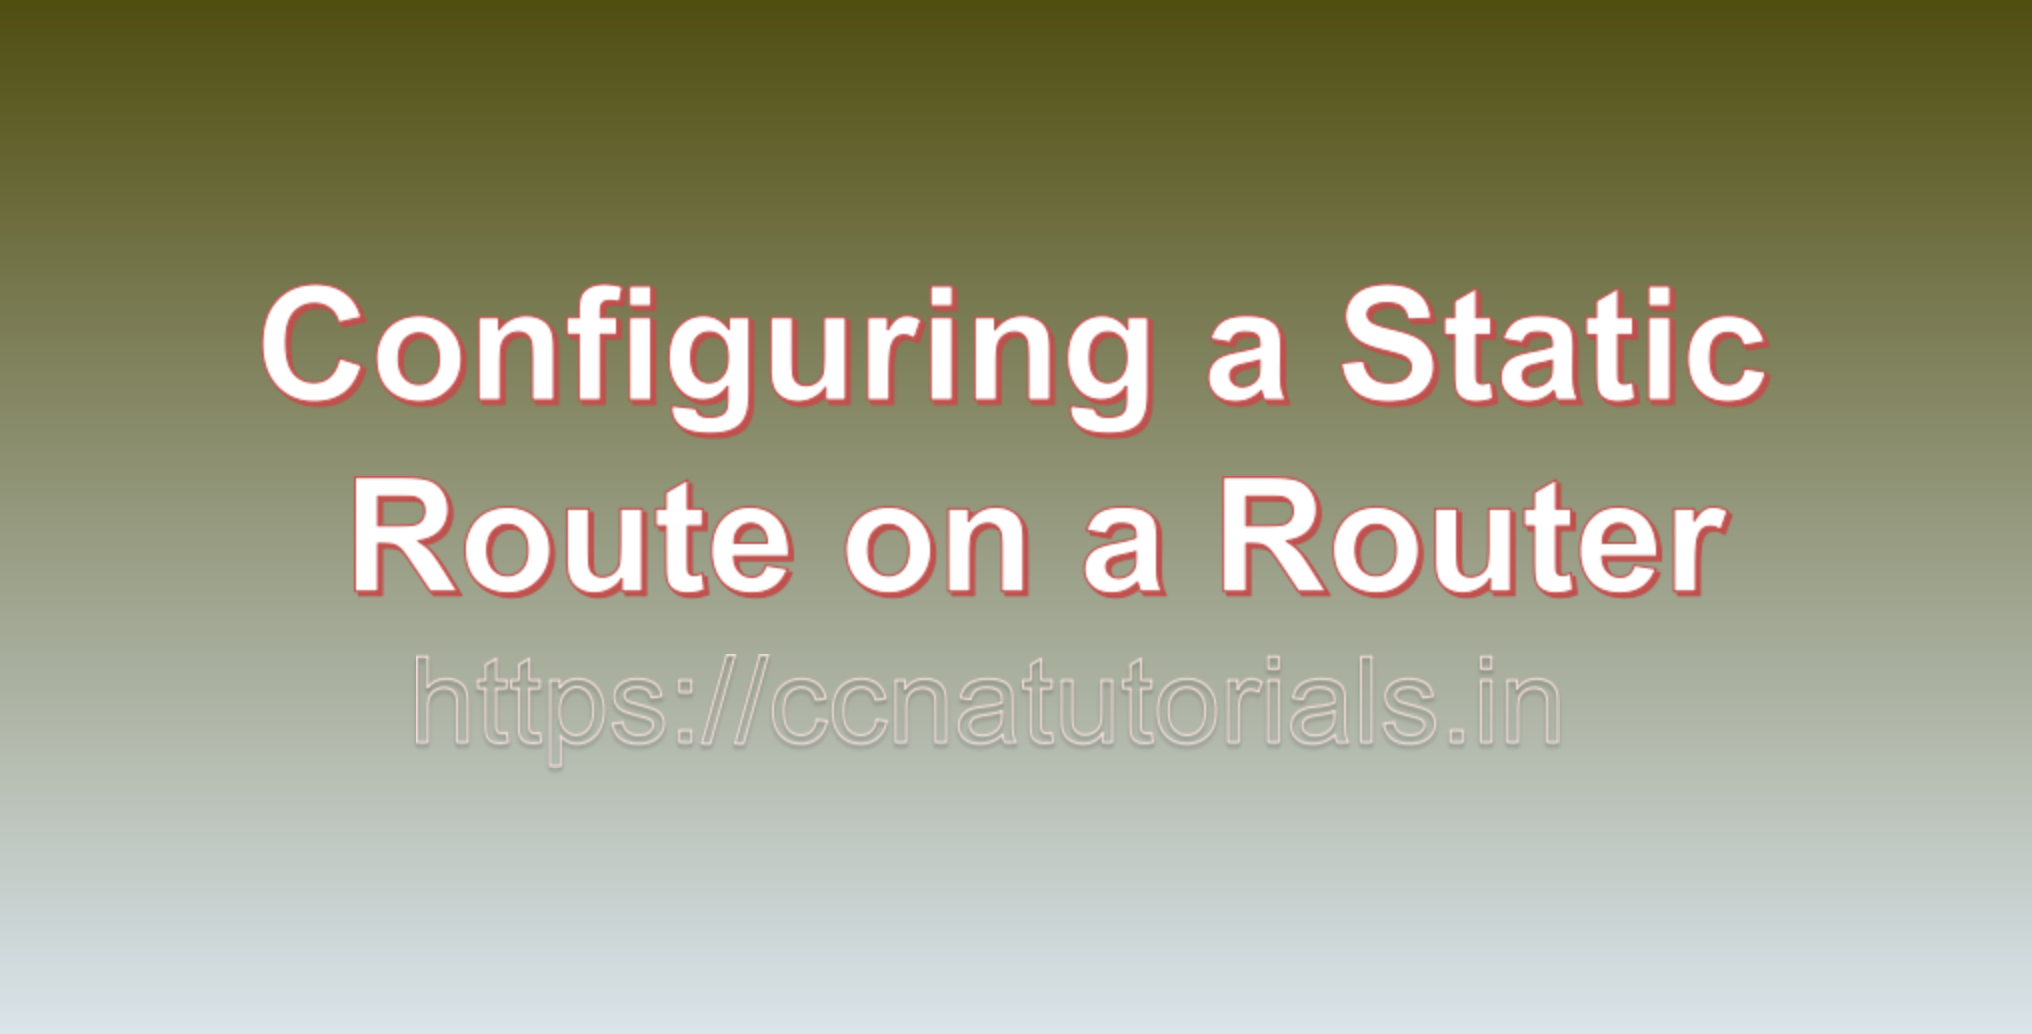 Configuring a Static Route on a Router, ccna, ccna tutorials